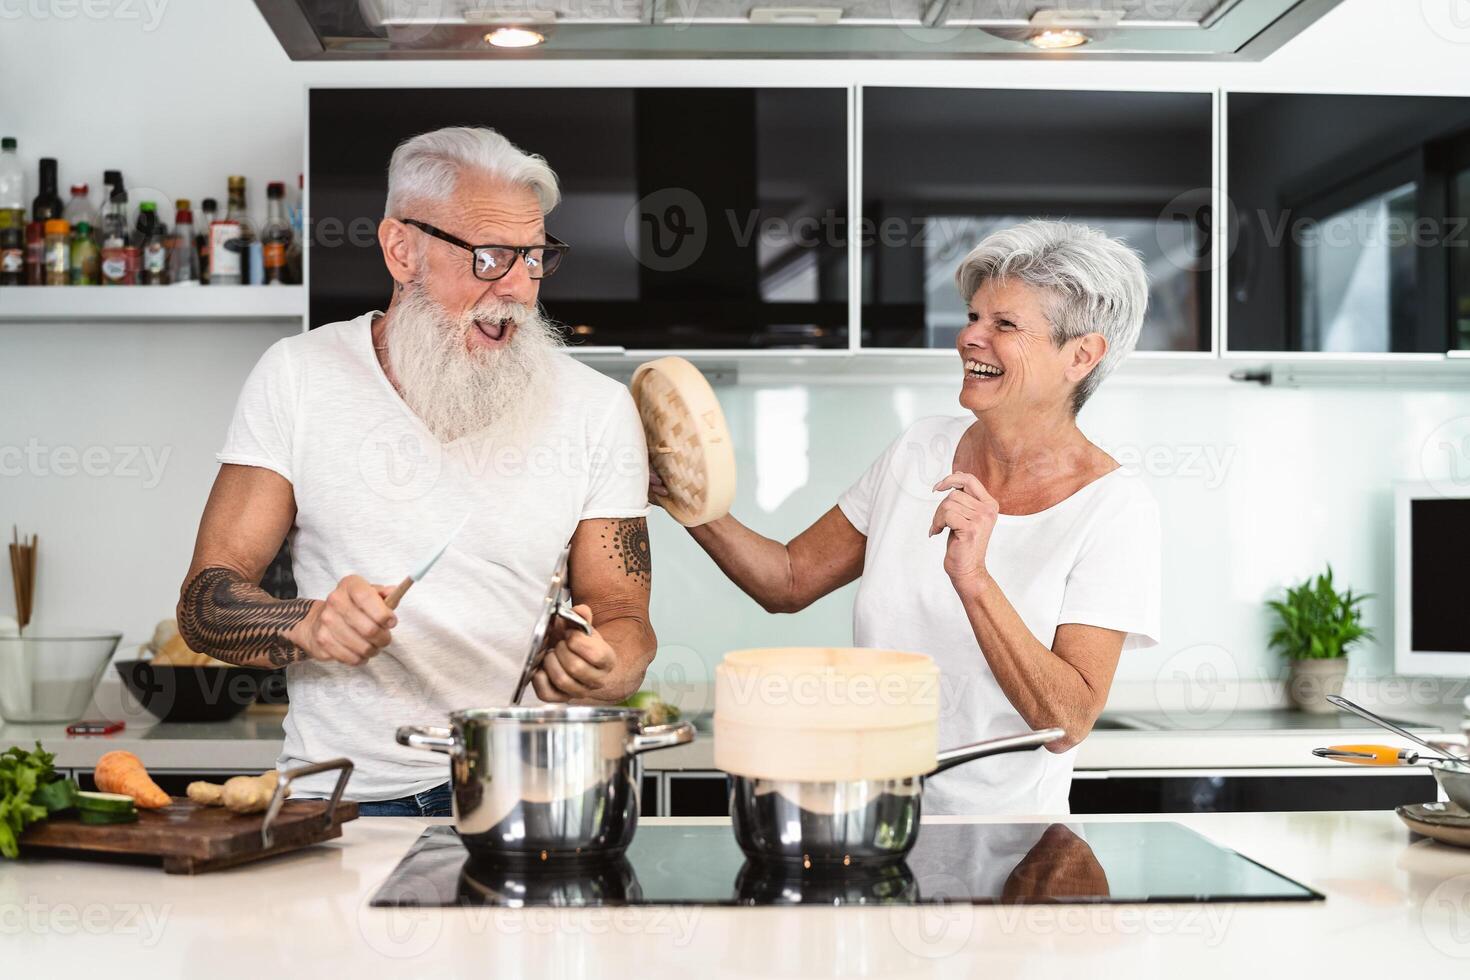 Happy senior couple having fun cooking together at home - Elderly people preparing health lunch in modern kitchen - Retired lifestyle family time and food nutrition concept photo